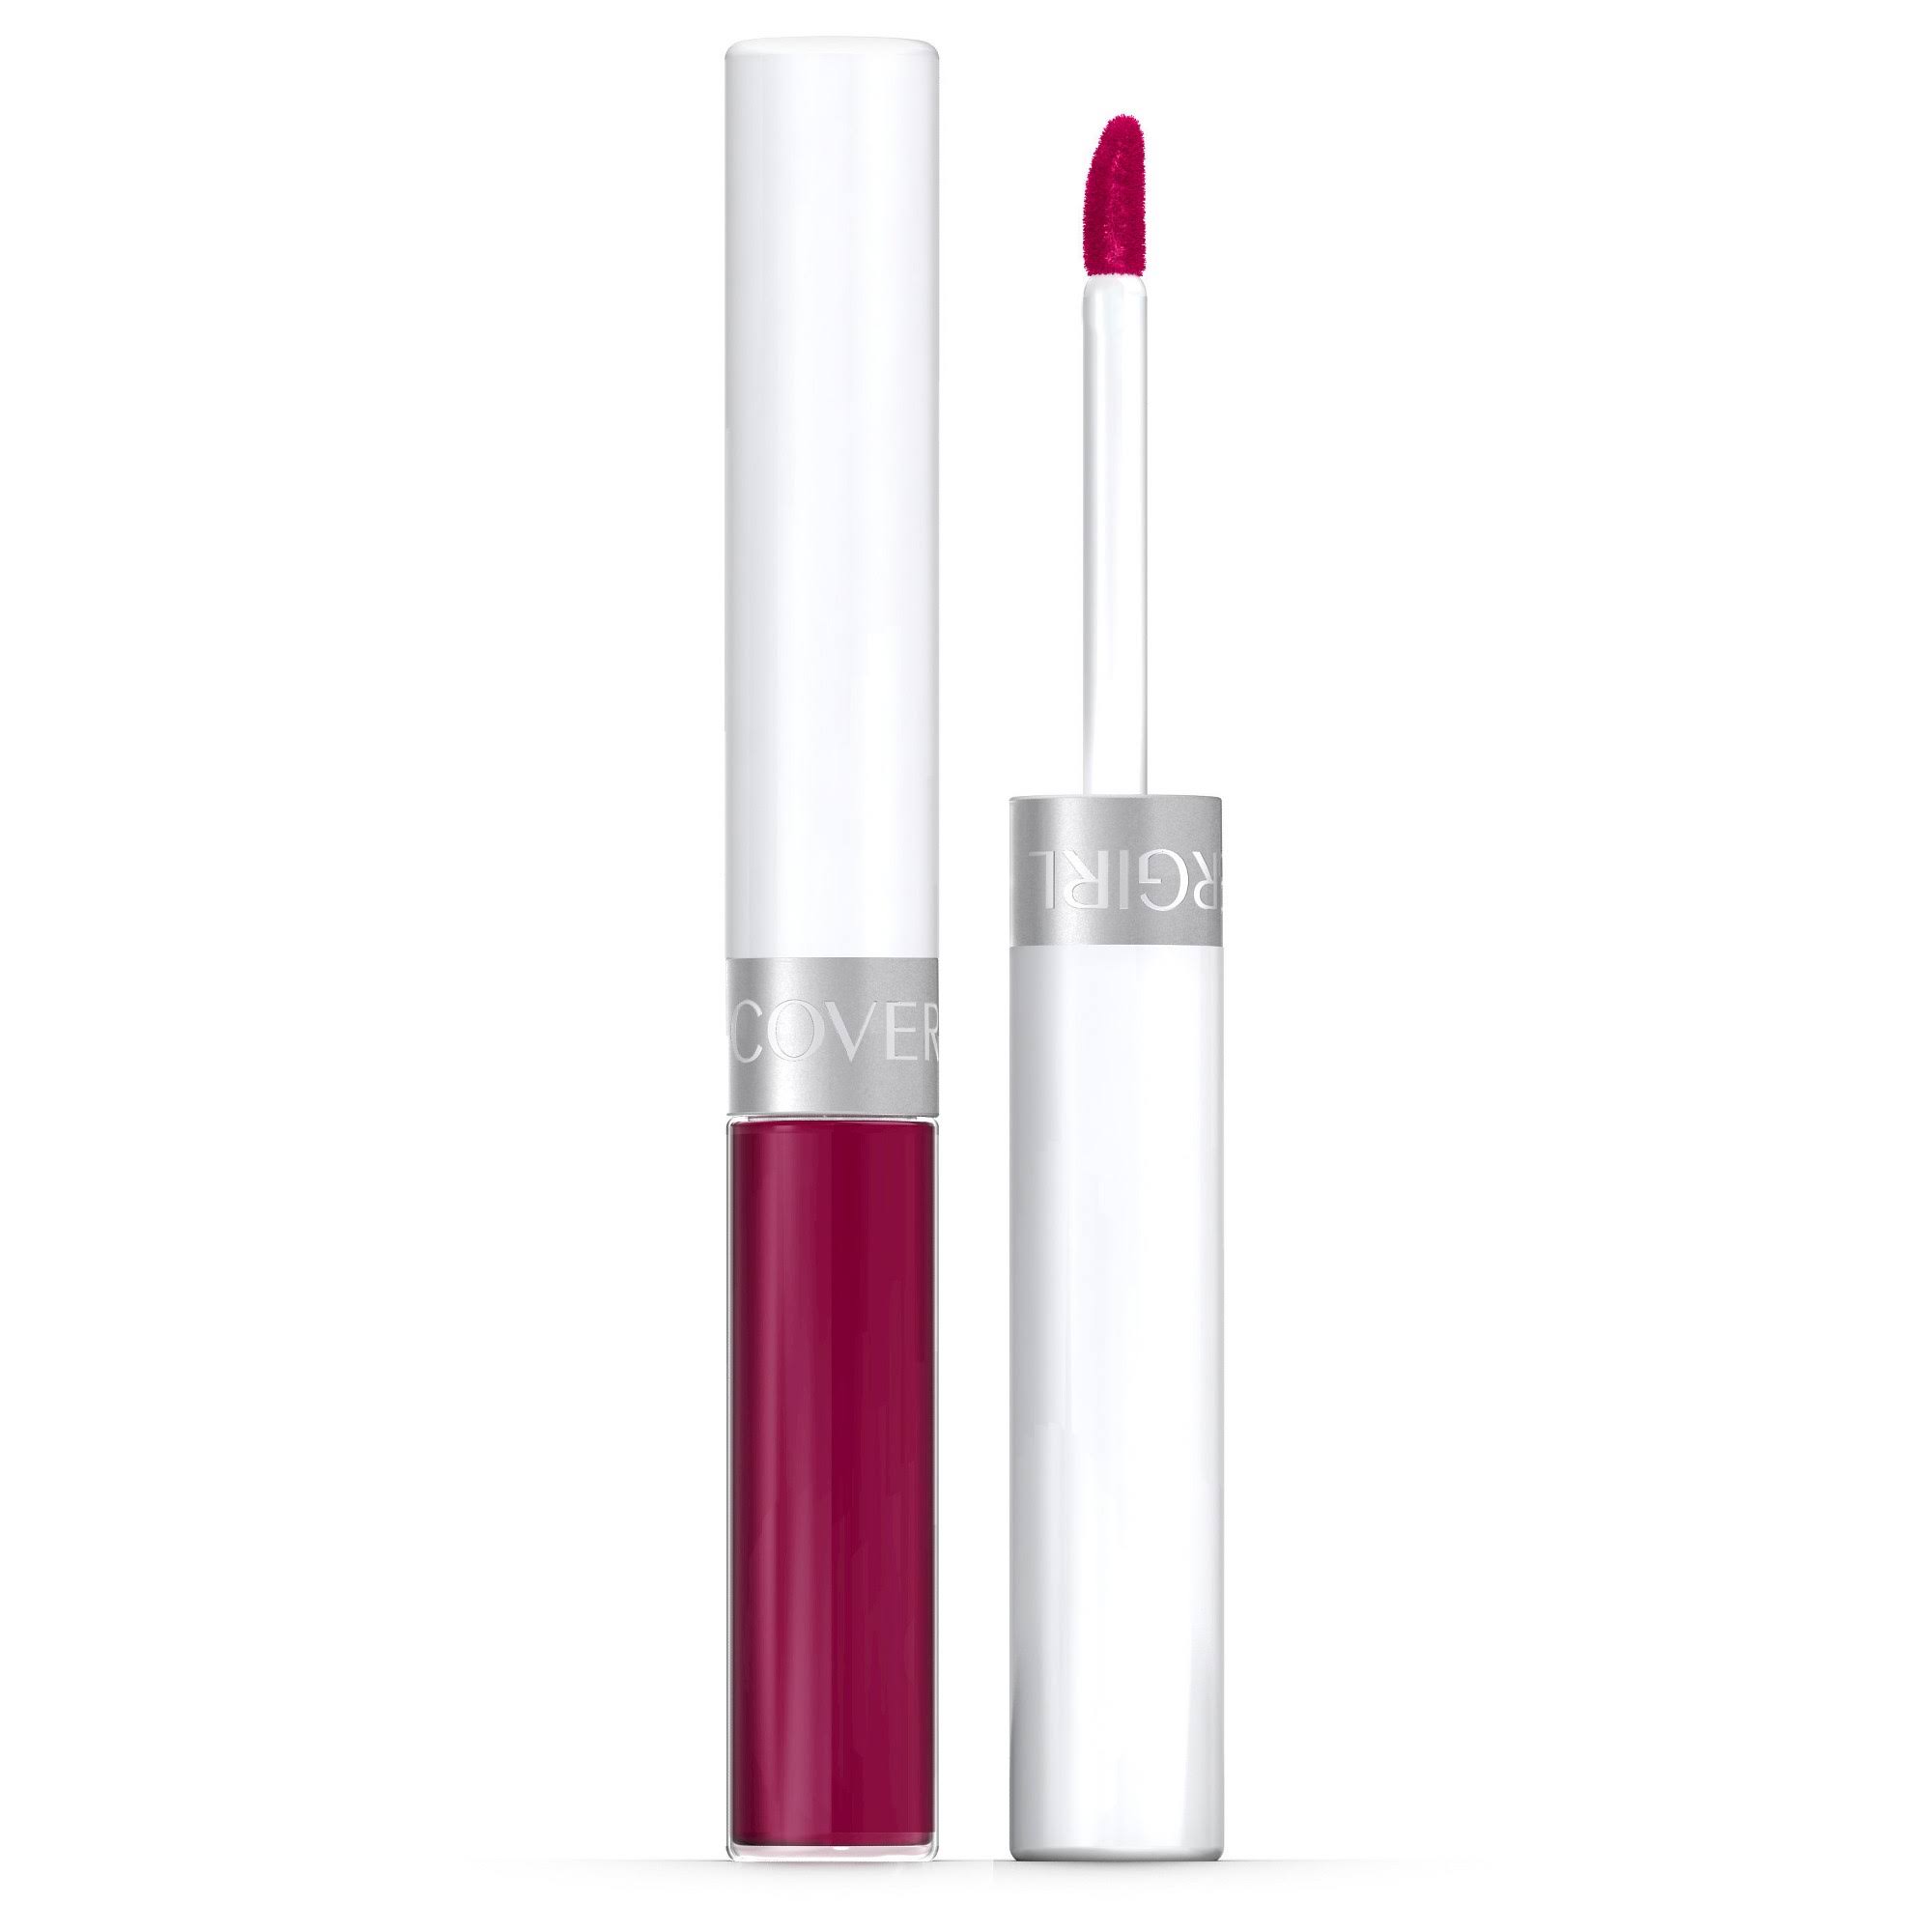 COVERGIRL Outlast All Day Lip color - Unique Burgundy, 4.2ml